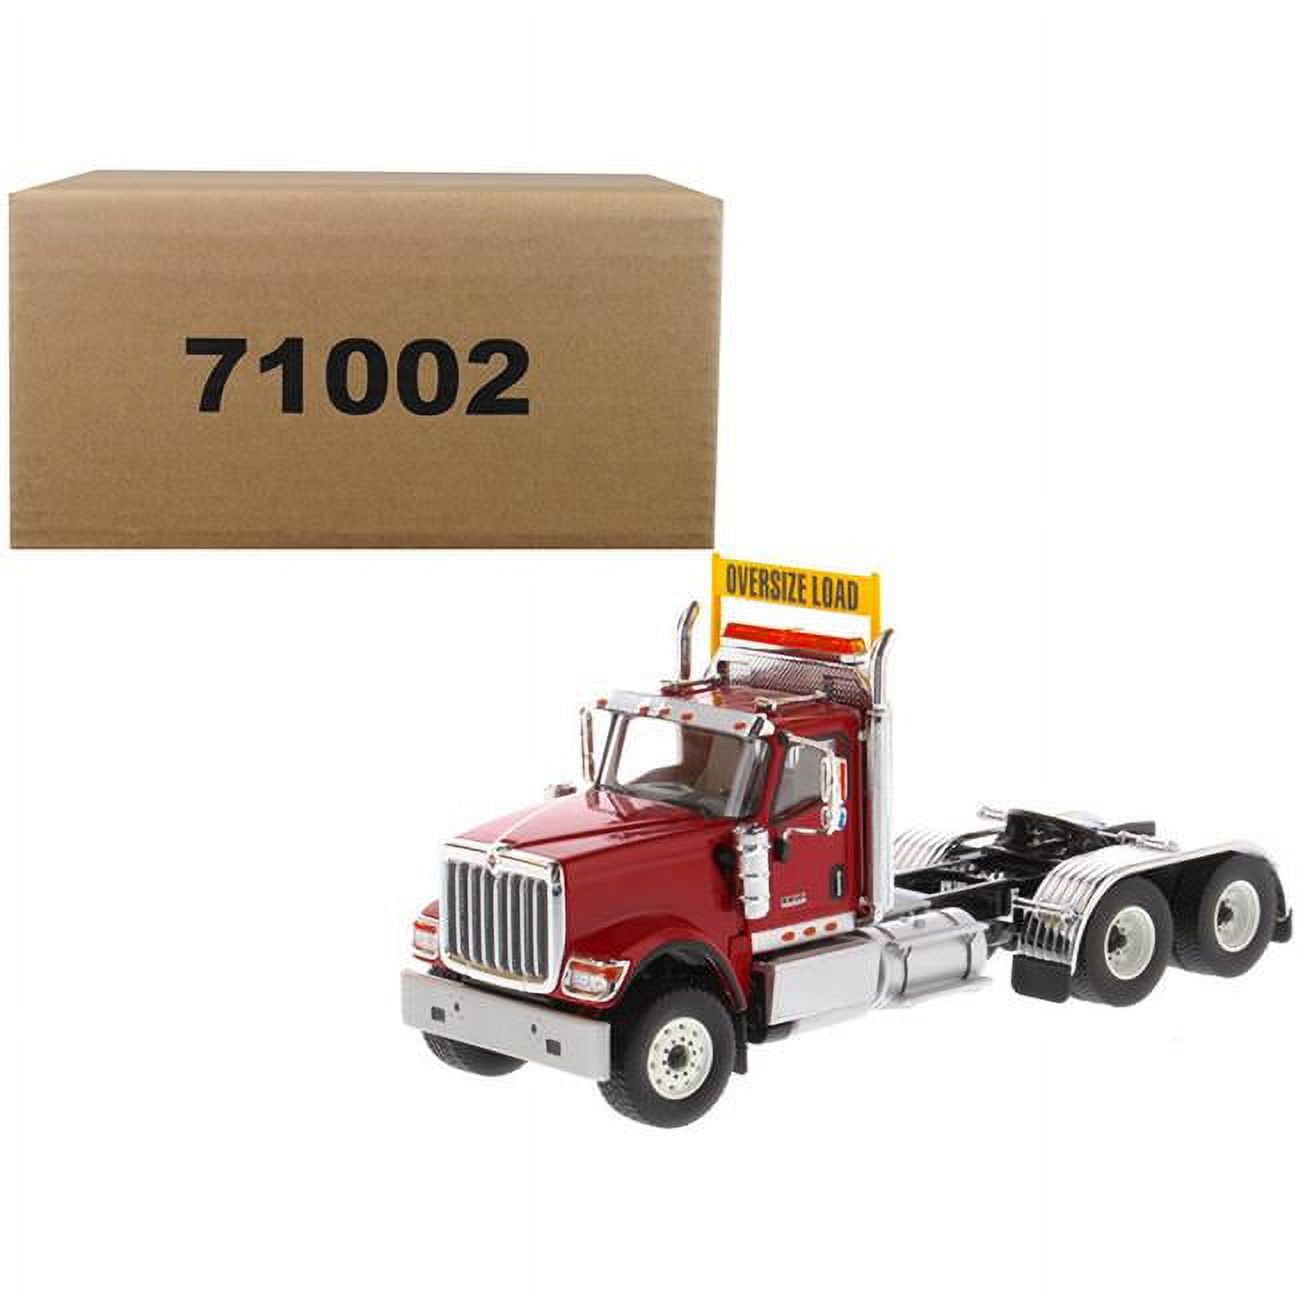 Picture of Diecast Masters 71002 International HX520 Day Cab Tandem Tractor 1-50 Diecast Model, Red